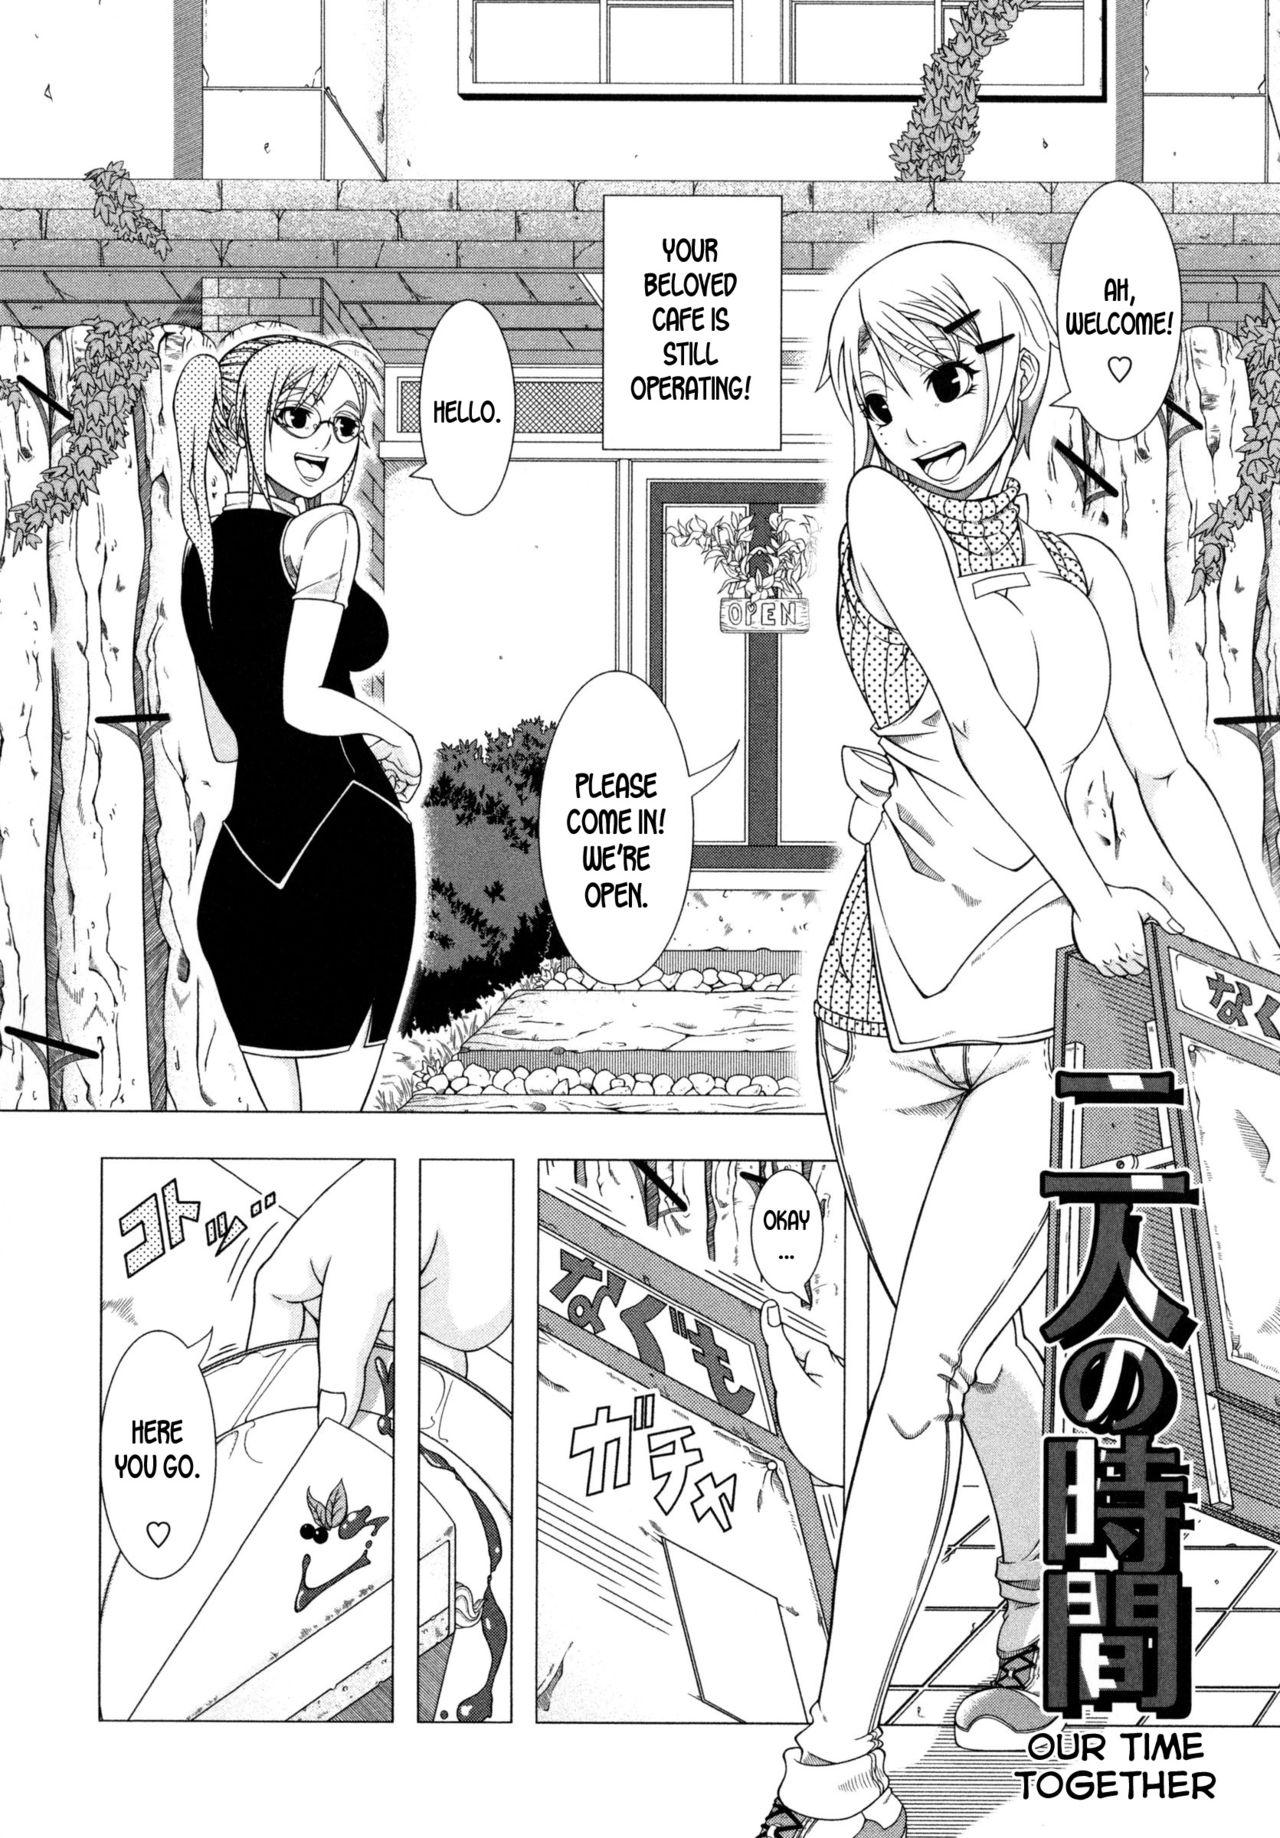 One Futari no Jikan | Our Time Together Lima - Page 2